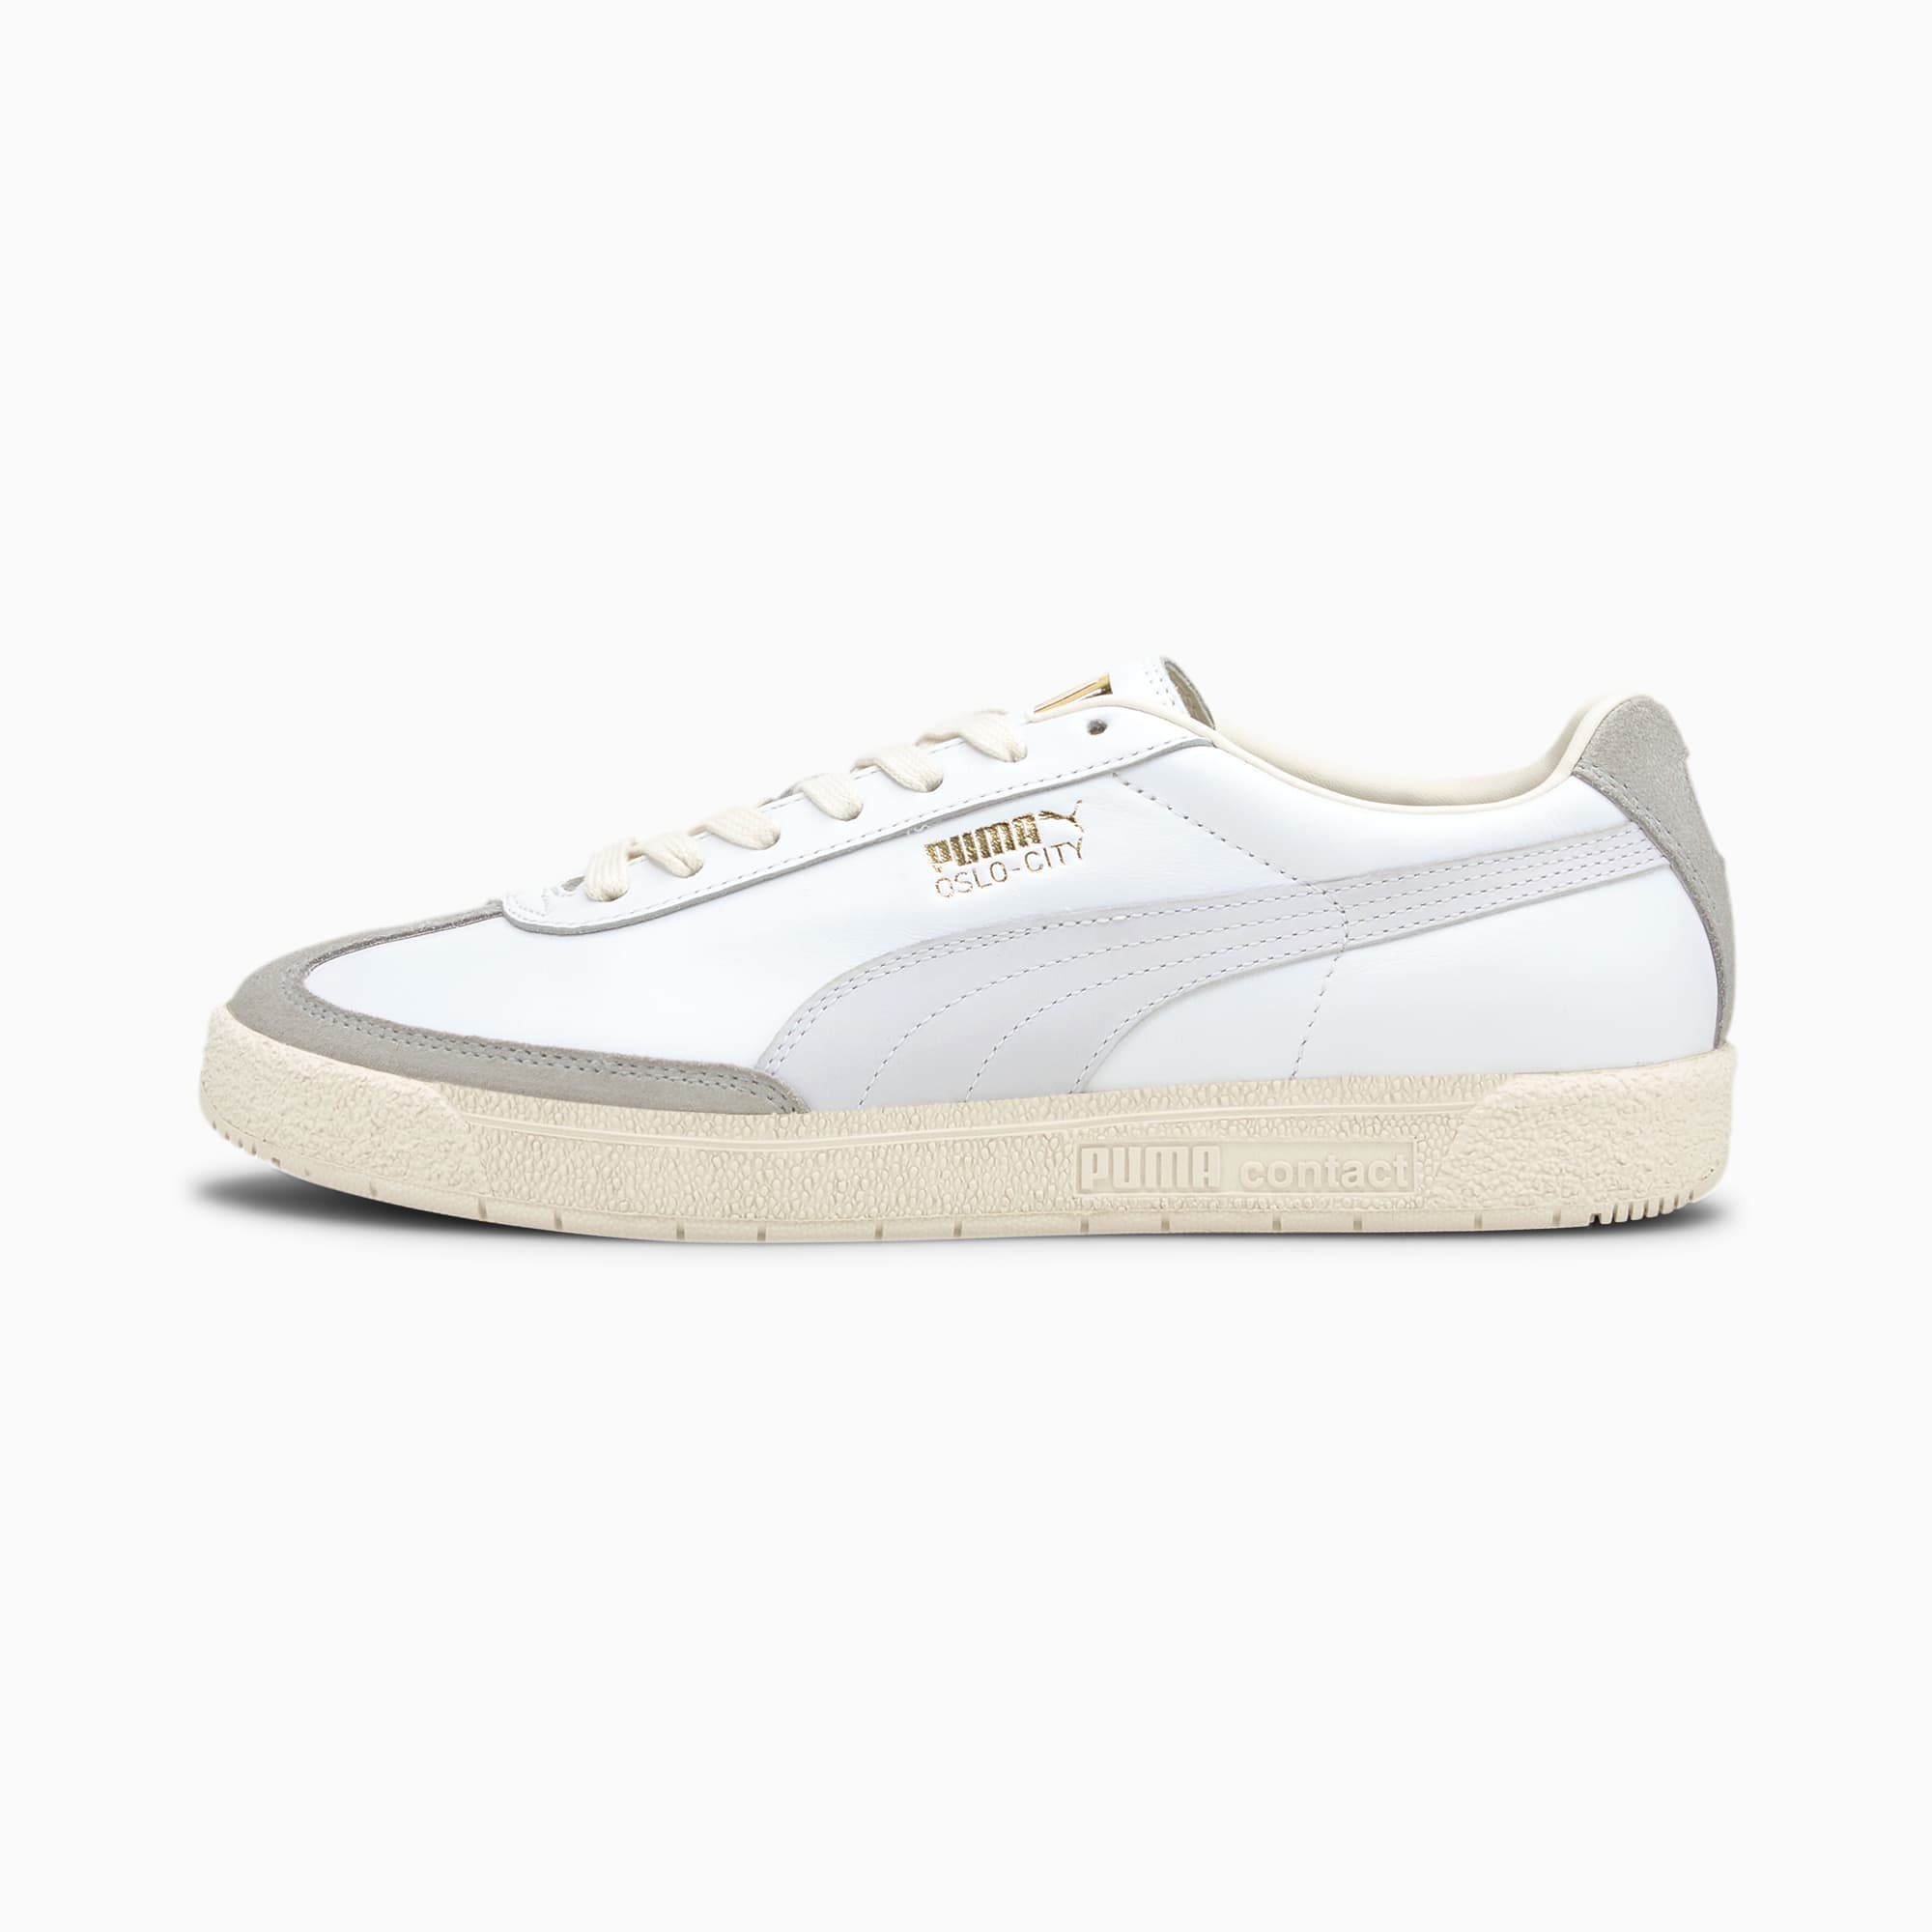 PUMA Chaussure Basket Oslo-City Luxe, Blanc/Gris, Taille 46, Chaussures